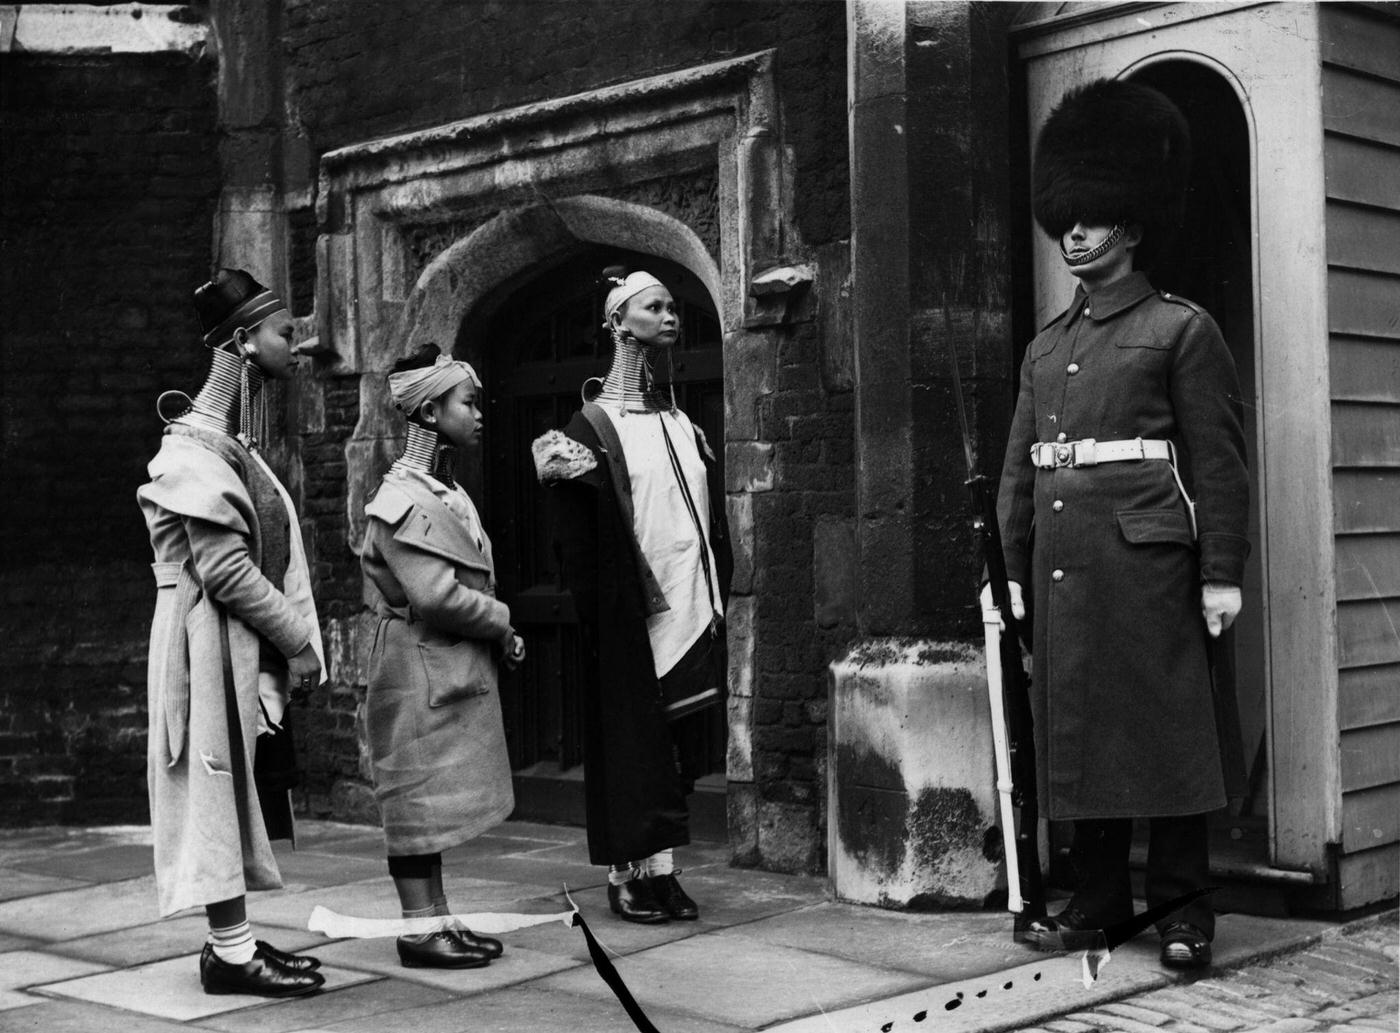 Giraffe necked women from Burma looking at a soldier standing guard in London, 1935.